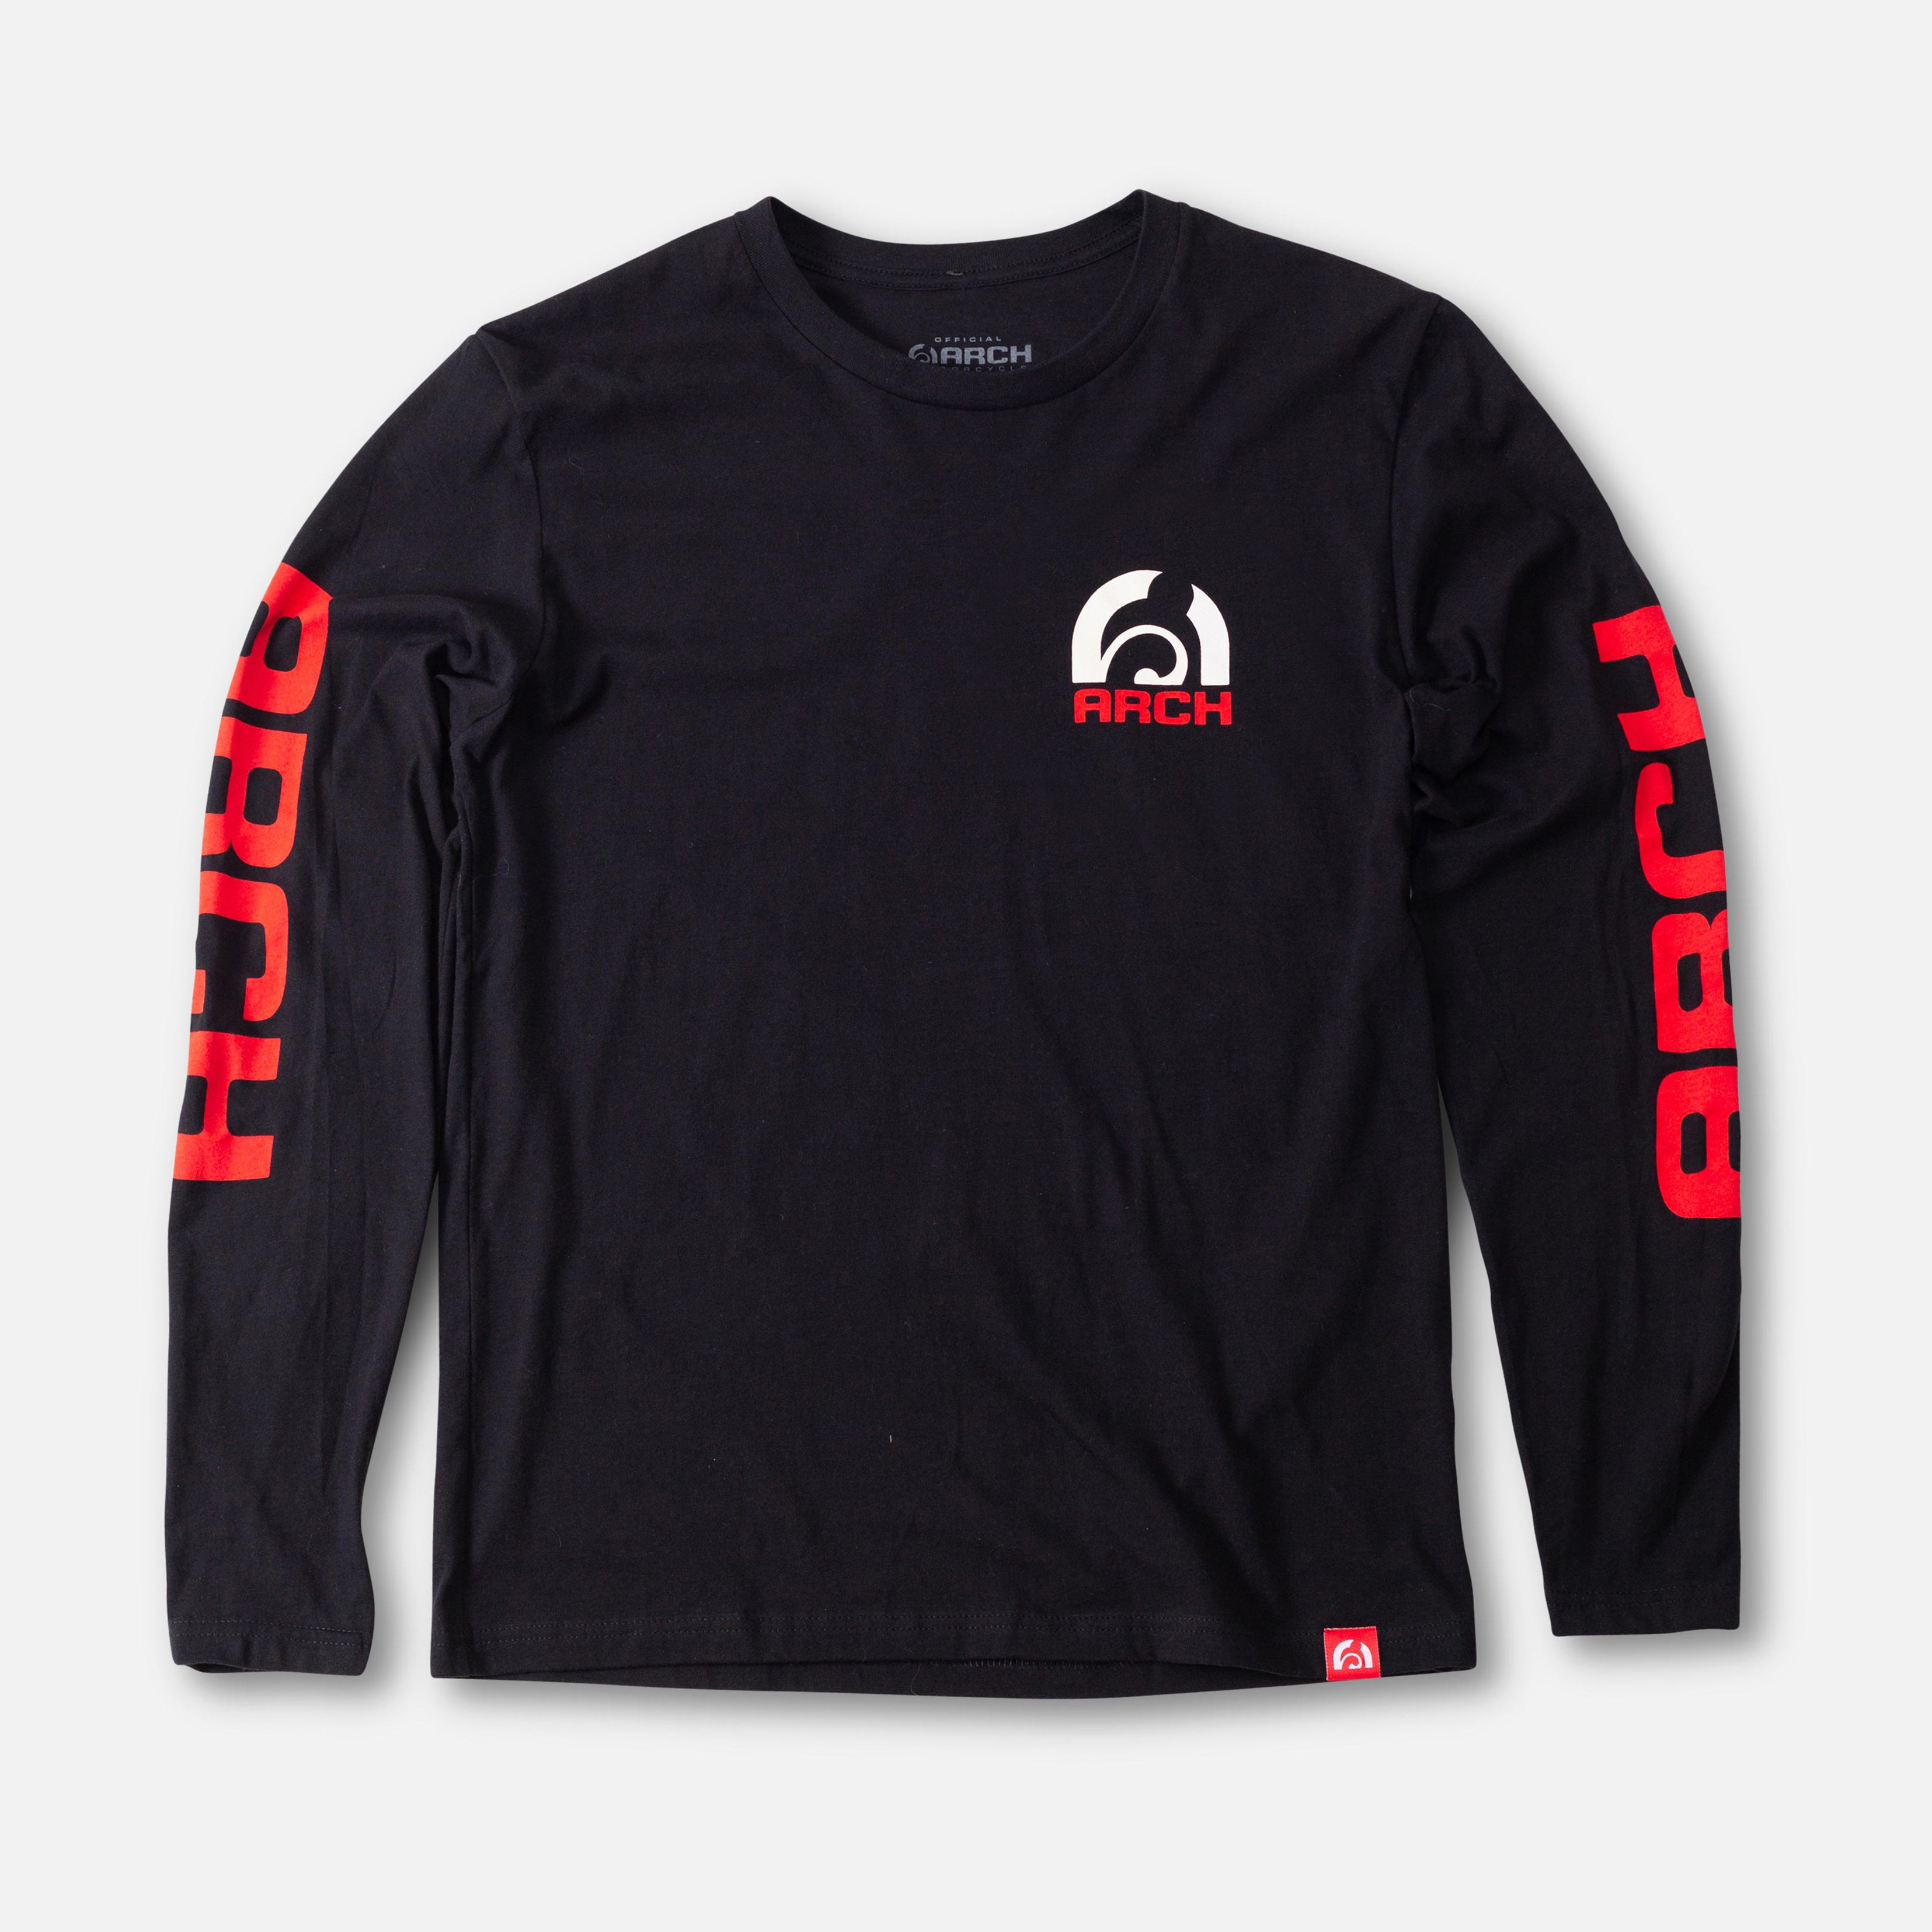 ARCH – ARCH Company, T-Shirt Long-Sleeve Motorcycle LLC Motorcycle